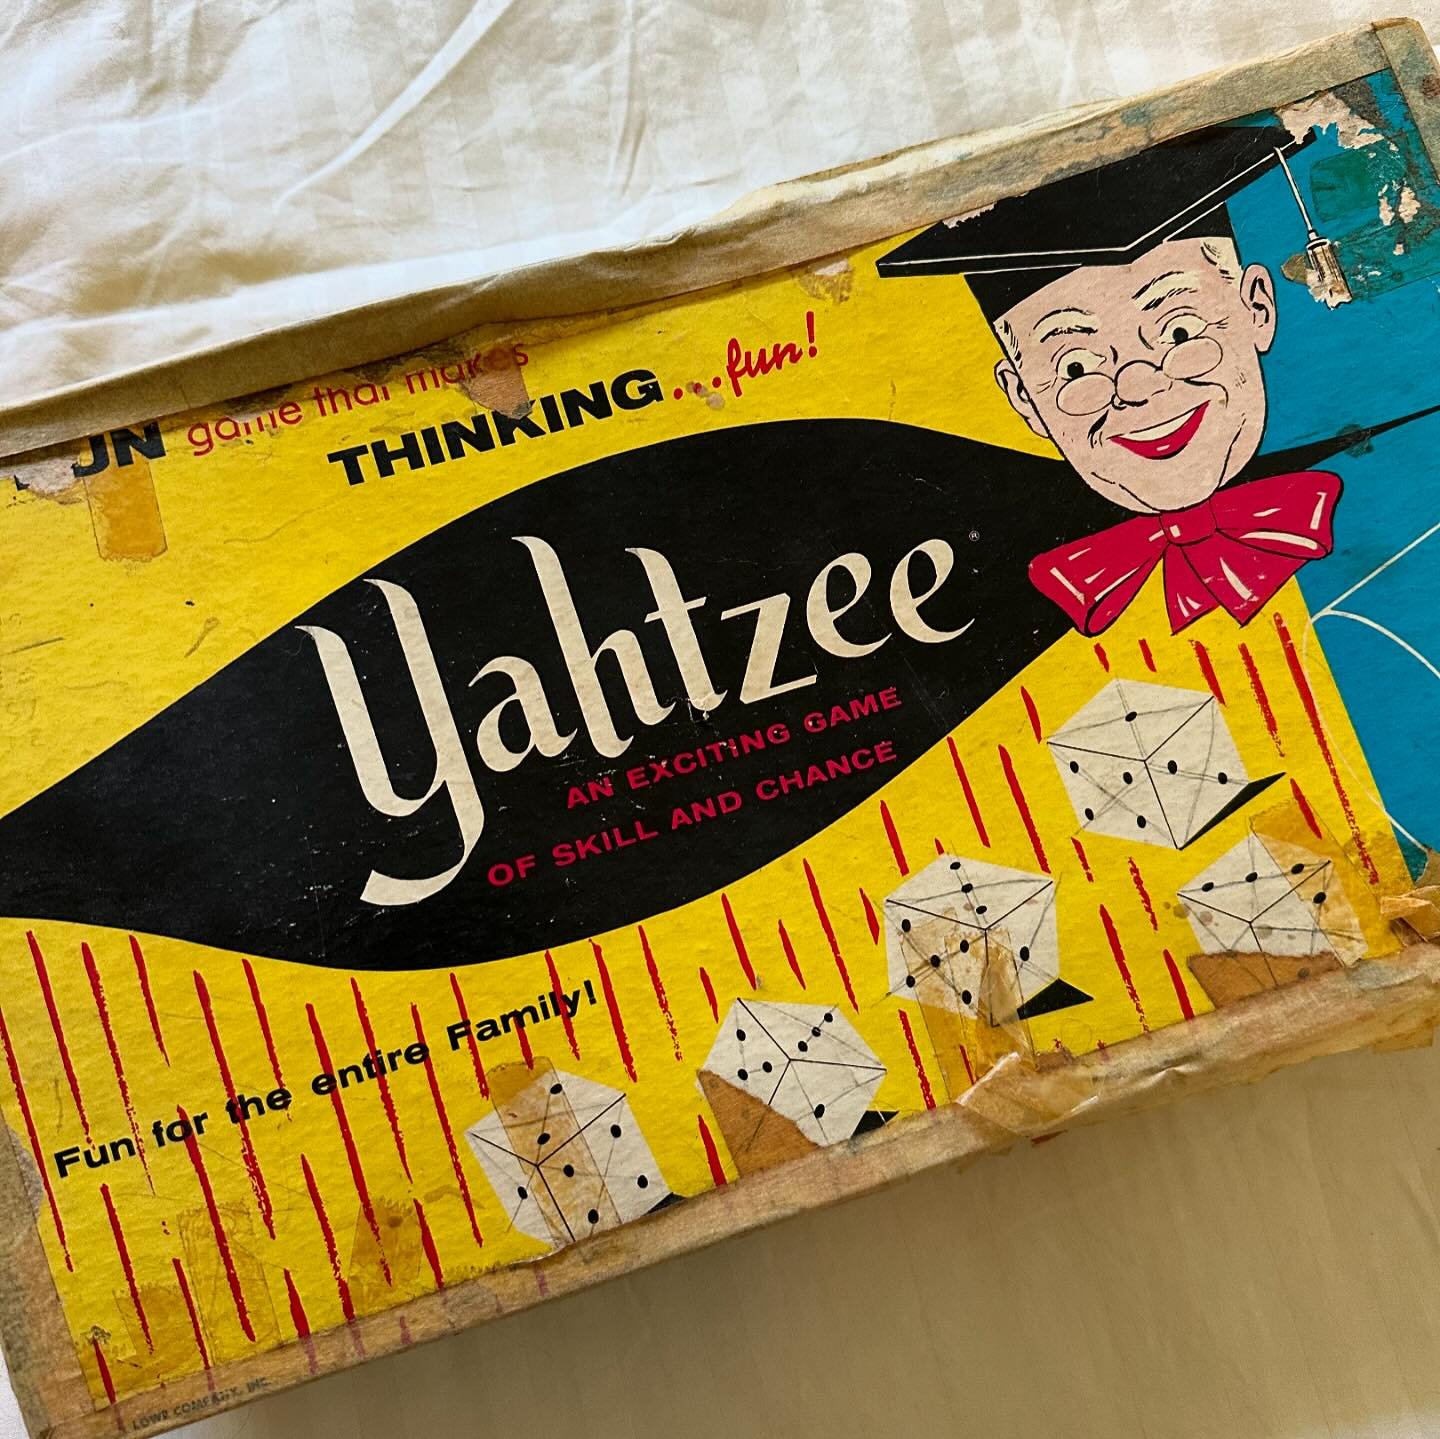 Yahtzee, my all-time favorite childhood game, is still being sold &mdash; 68 years since it first hit the shelves. Roll the dice on today&rsquo;s yoopercabingrl blog: manninenscabins.com/cabin-blog 🎲 Group photo by @klemandco